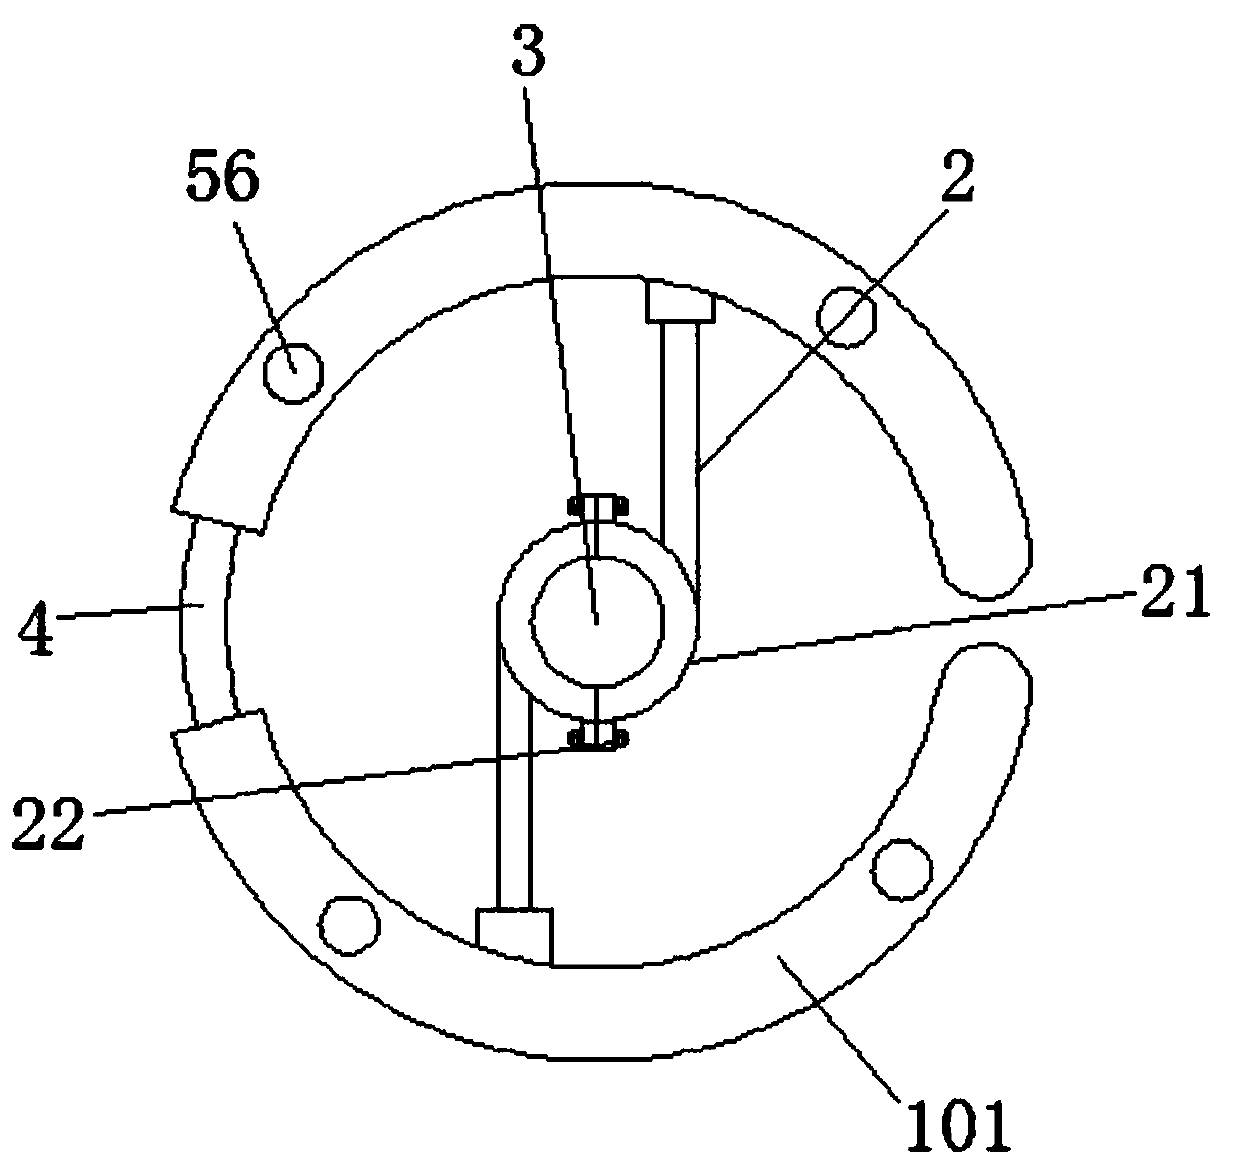 An aluminum equalizing ring for an insulator